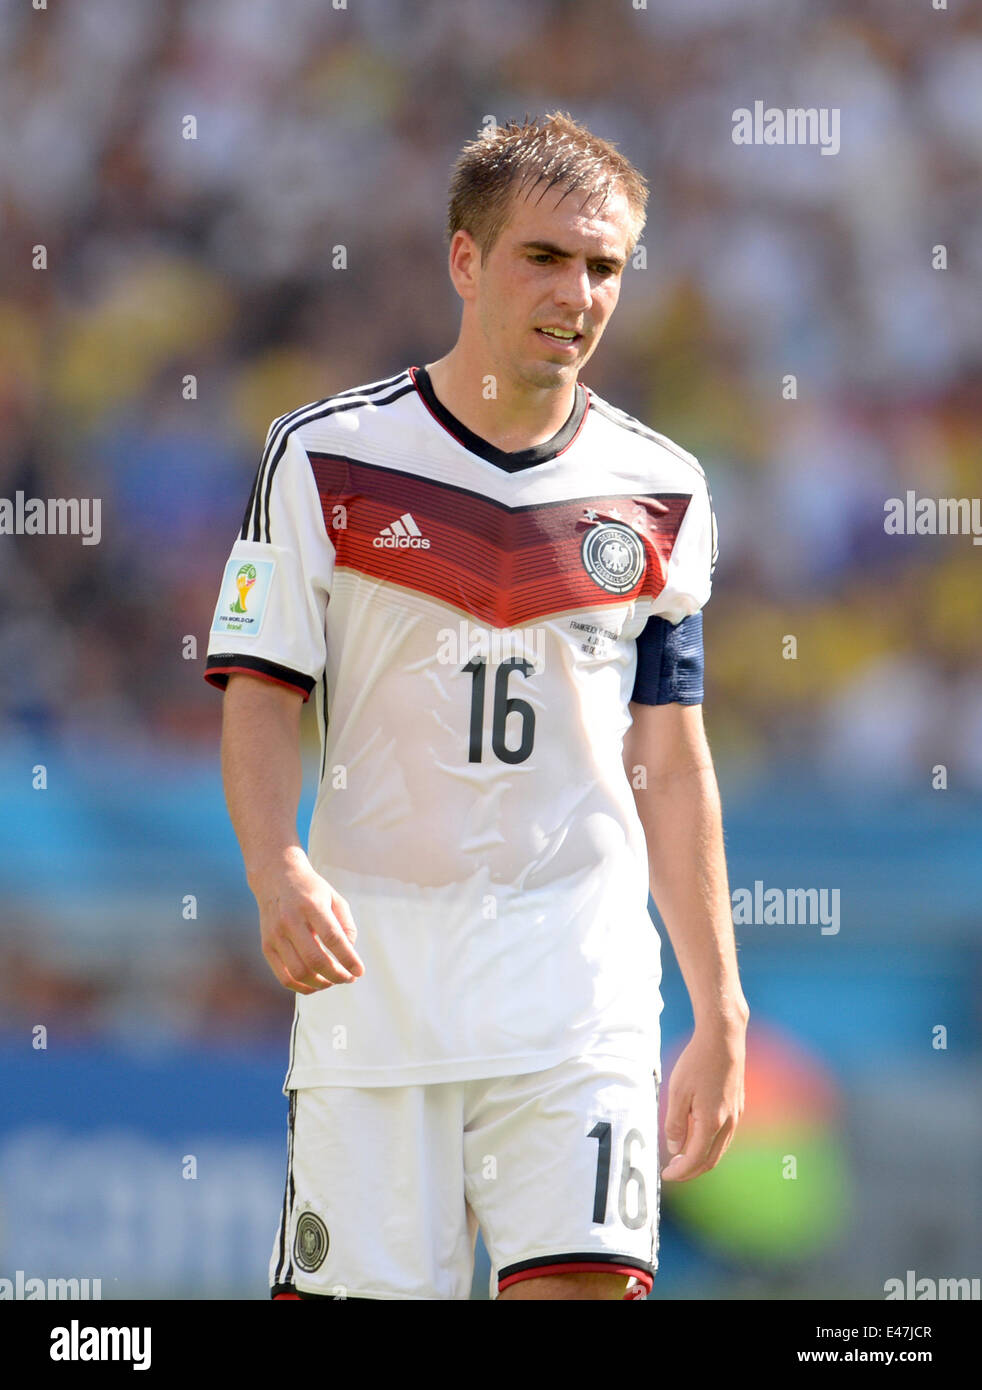 Rio De Janeiro Brazil 04th July 14 Philipp Lahm Of Germany Reacts During The Fifa World Cup 14 Quarter Final Soccer Match Between France And Germany At Estadio Do Maracana In Rio